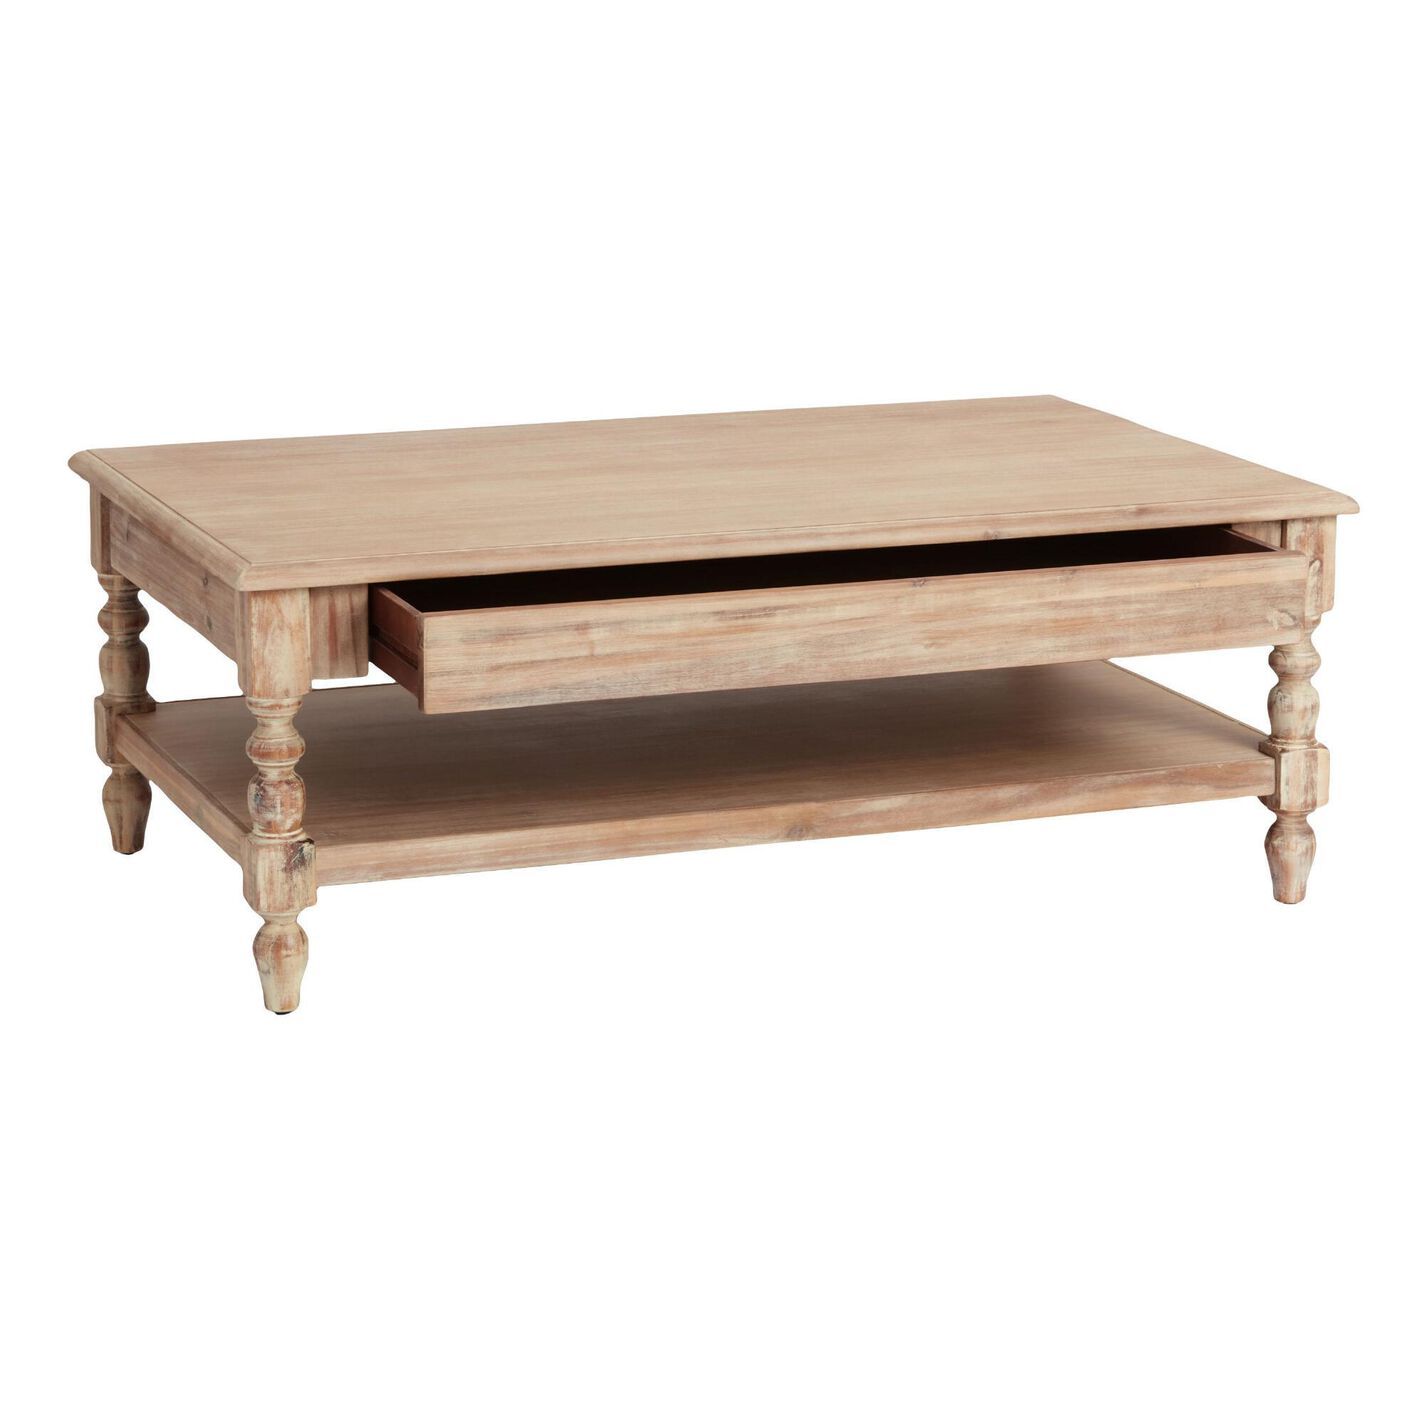 Everett Weathered Natural Wood Coffee Table | World Market